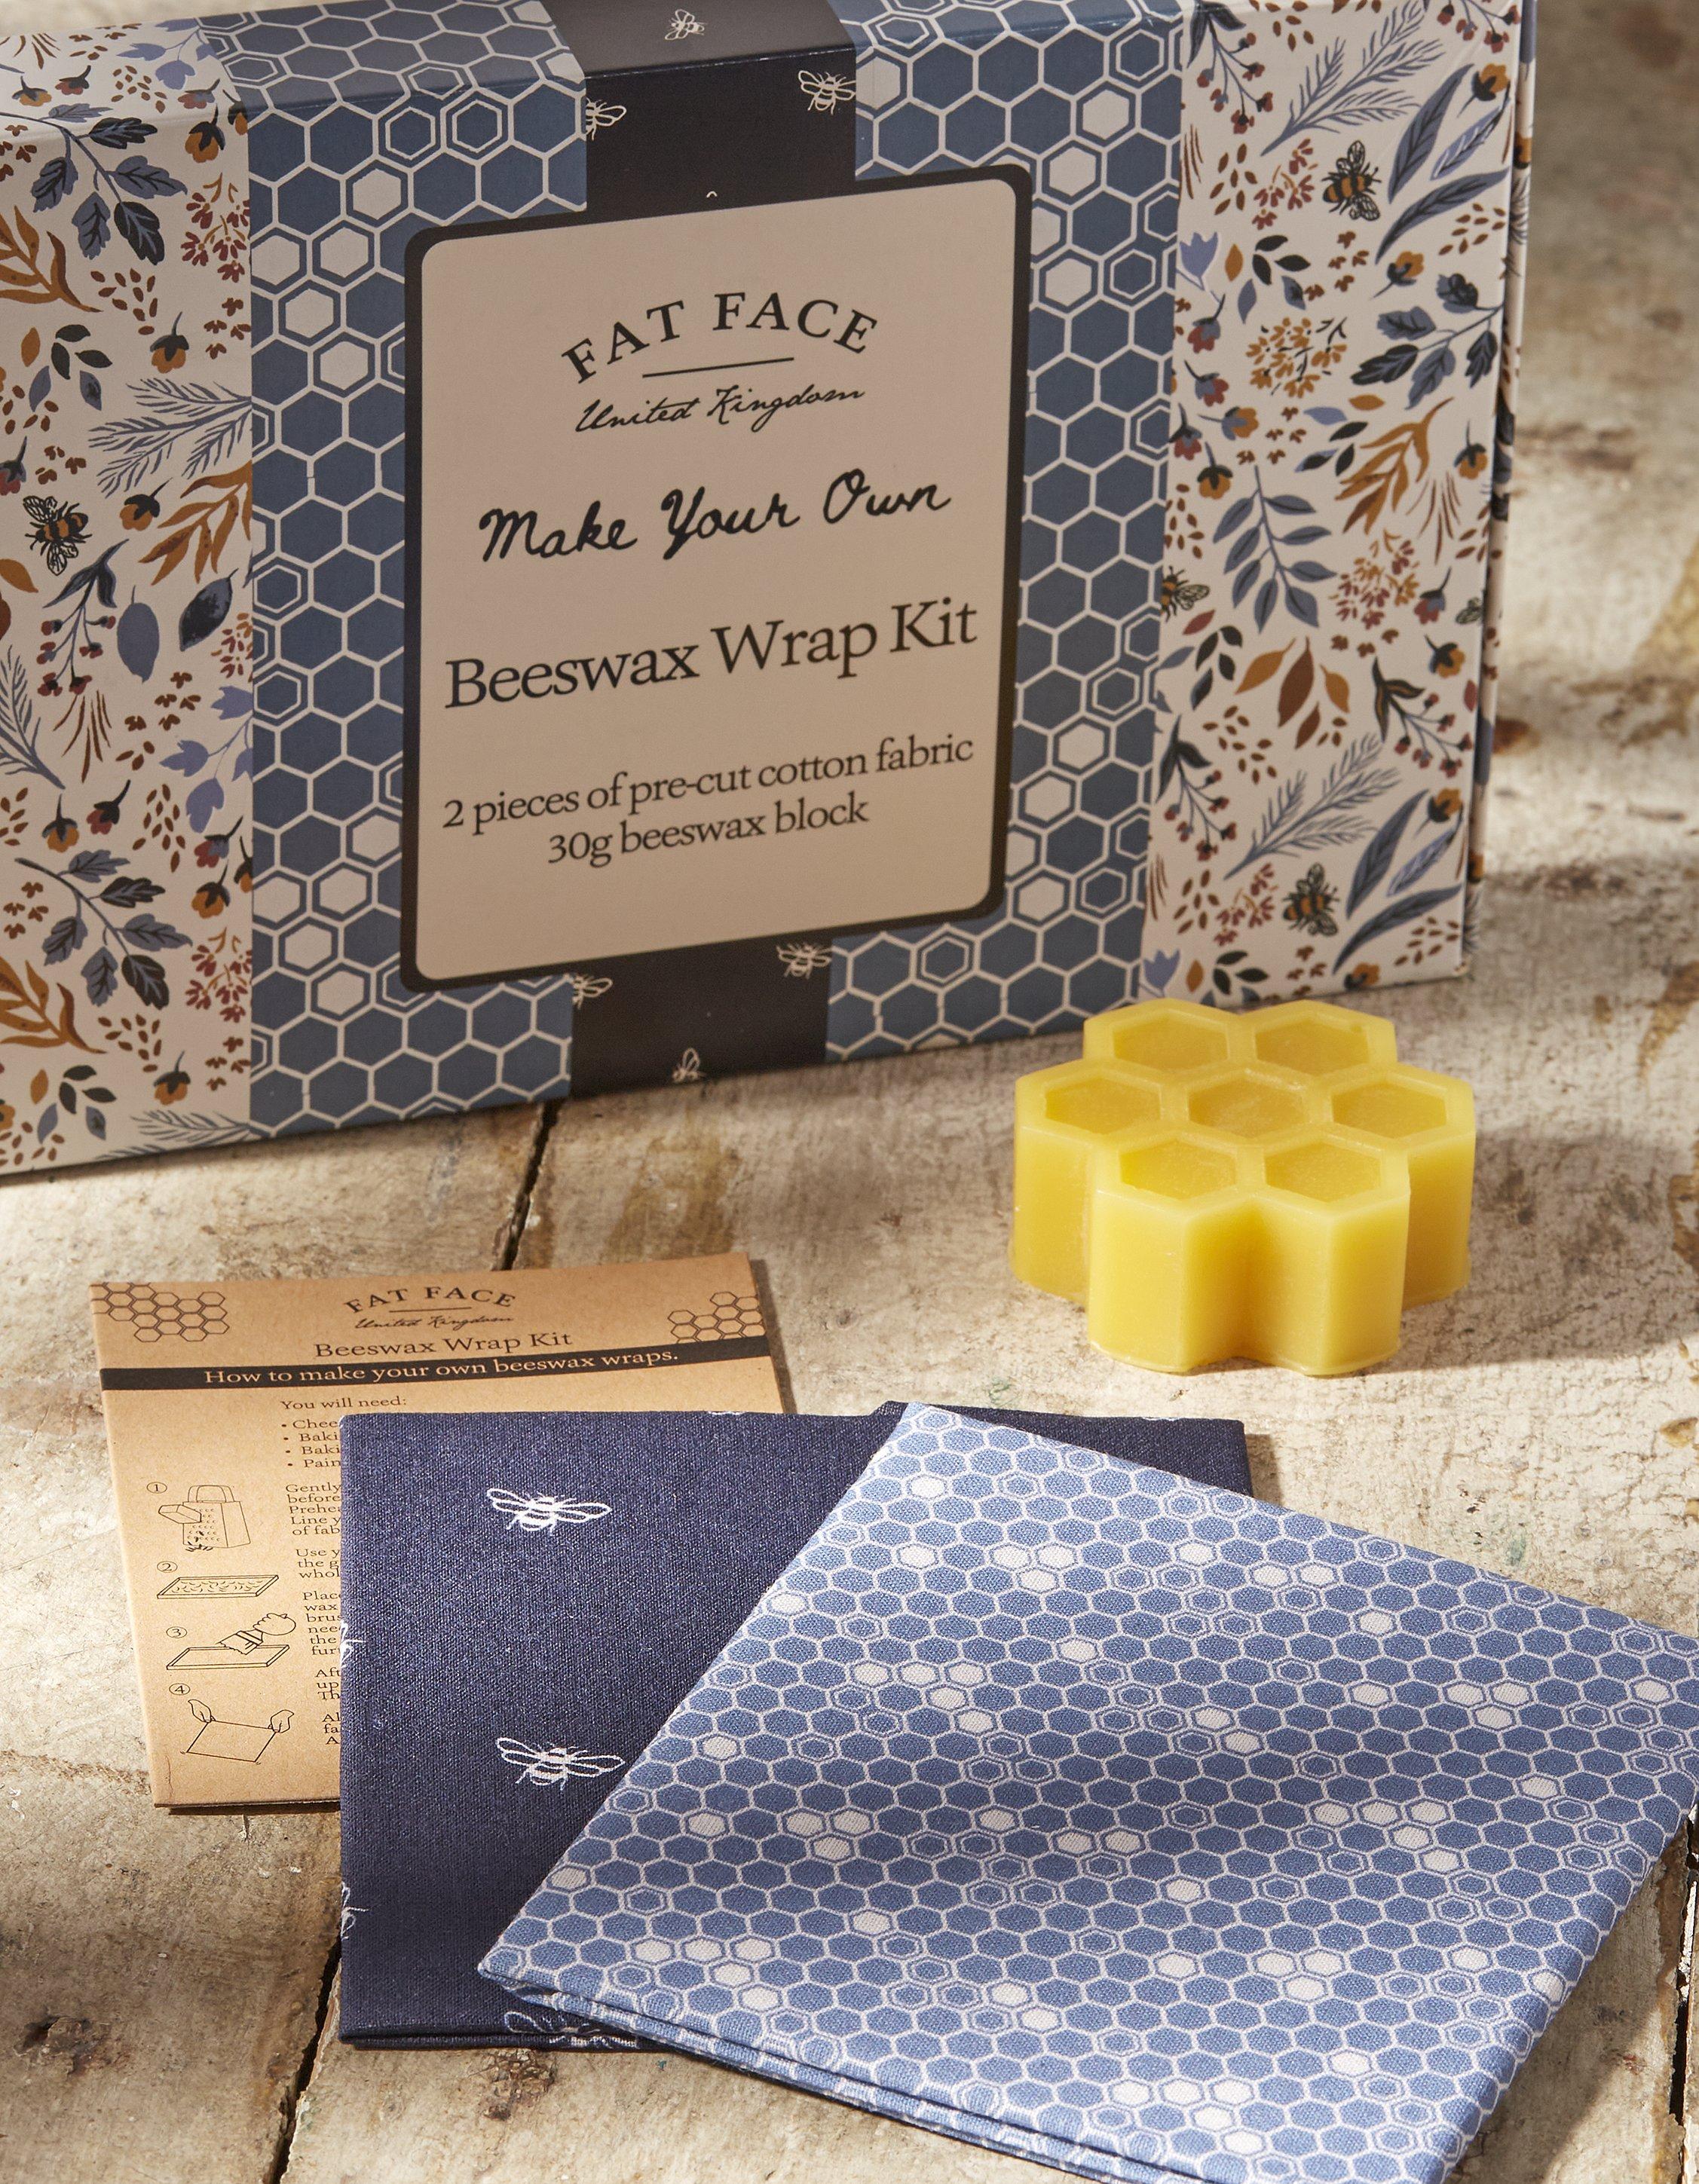 Make Your Own Beeswax Wrap Kit